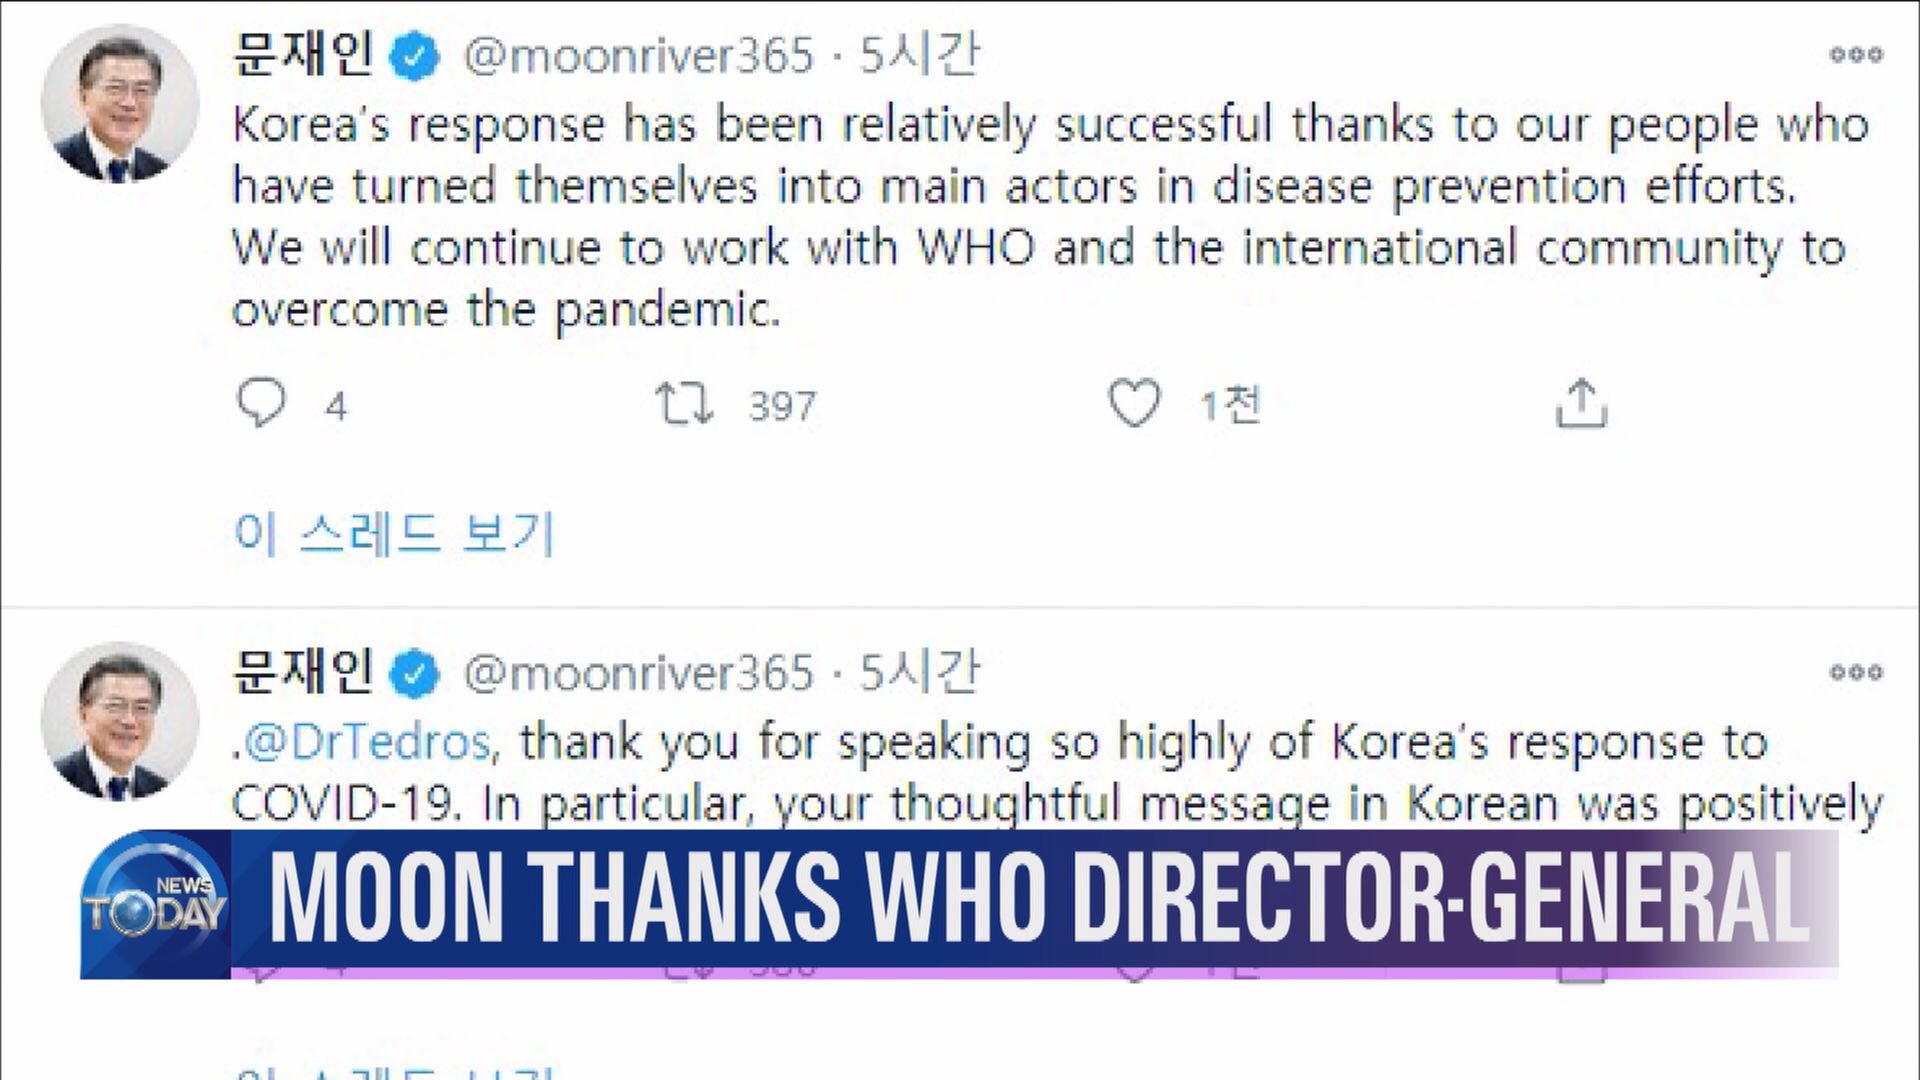 MOON THANKS WHO DIRECTOR-GENERAL